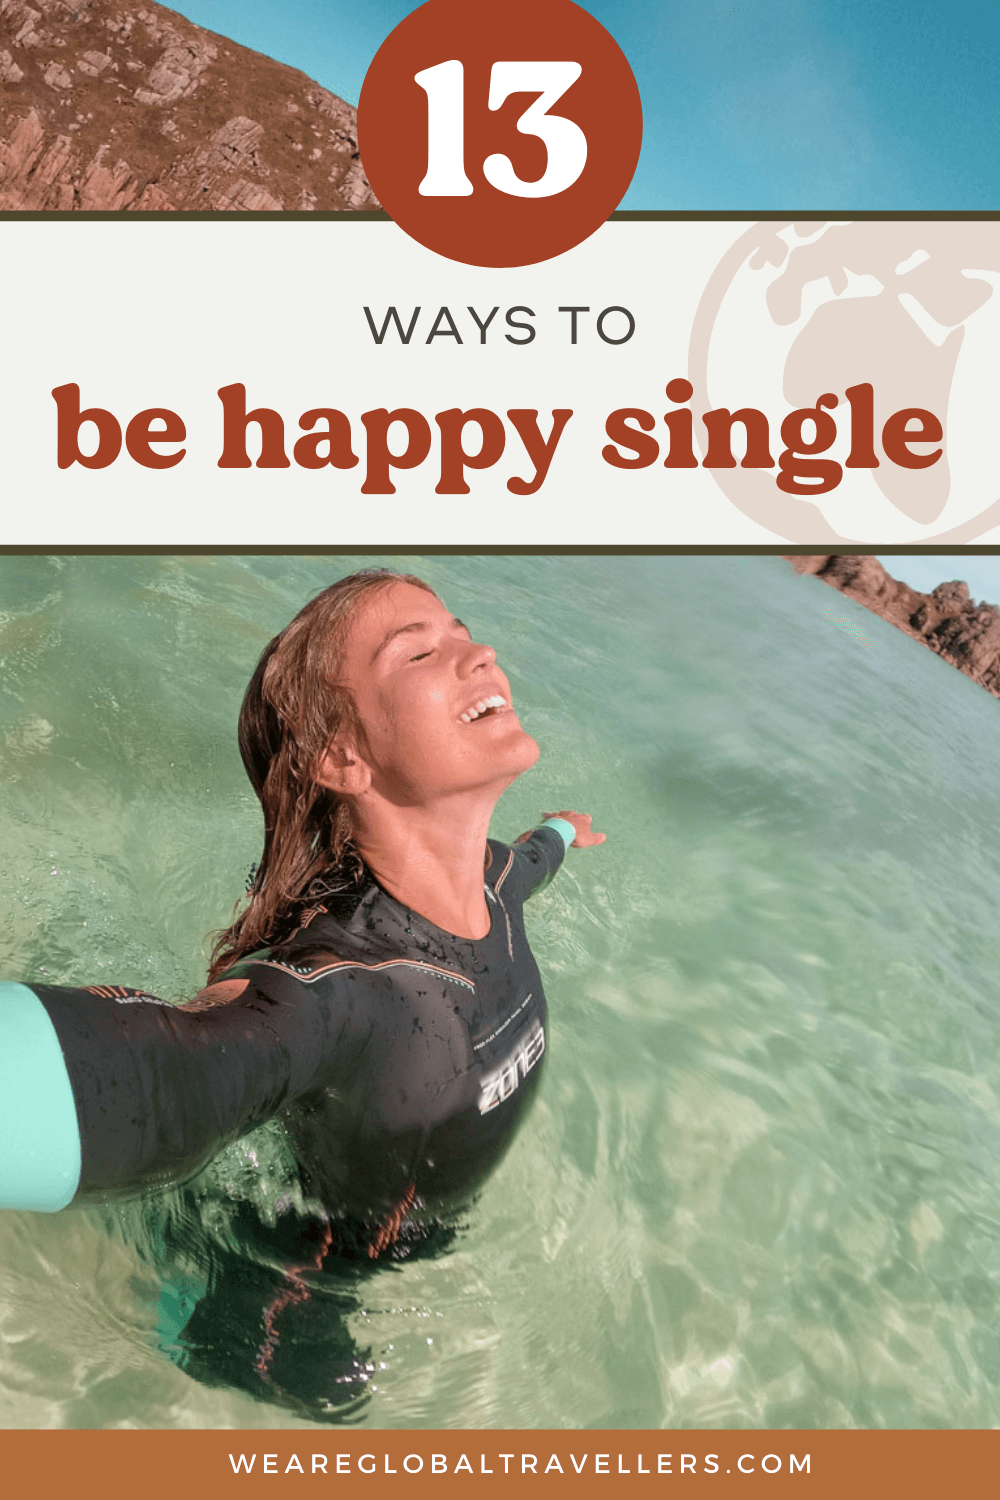 Reasons you should celebrate, embrace and be happy single